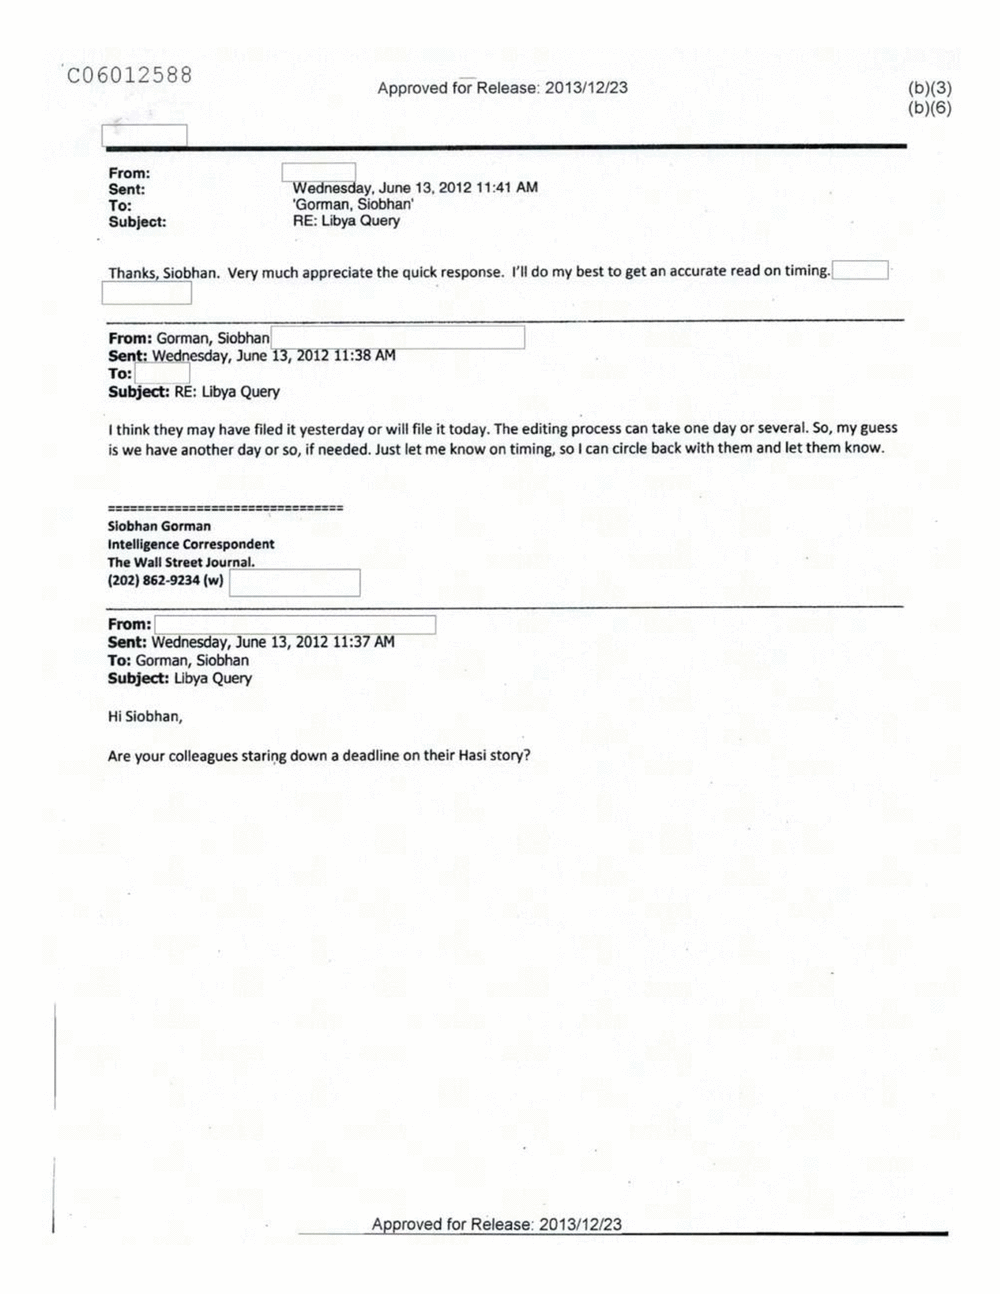 Page 137 from Email Correspondence Between Reporters and CIA Flacks